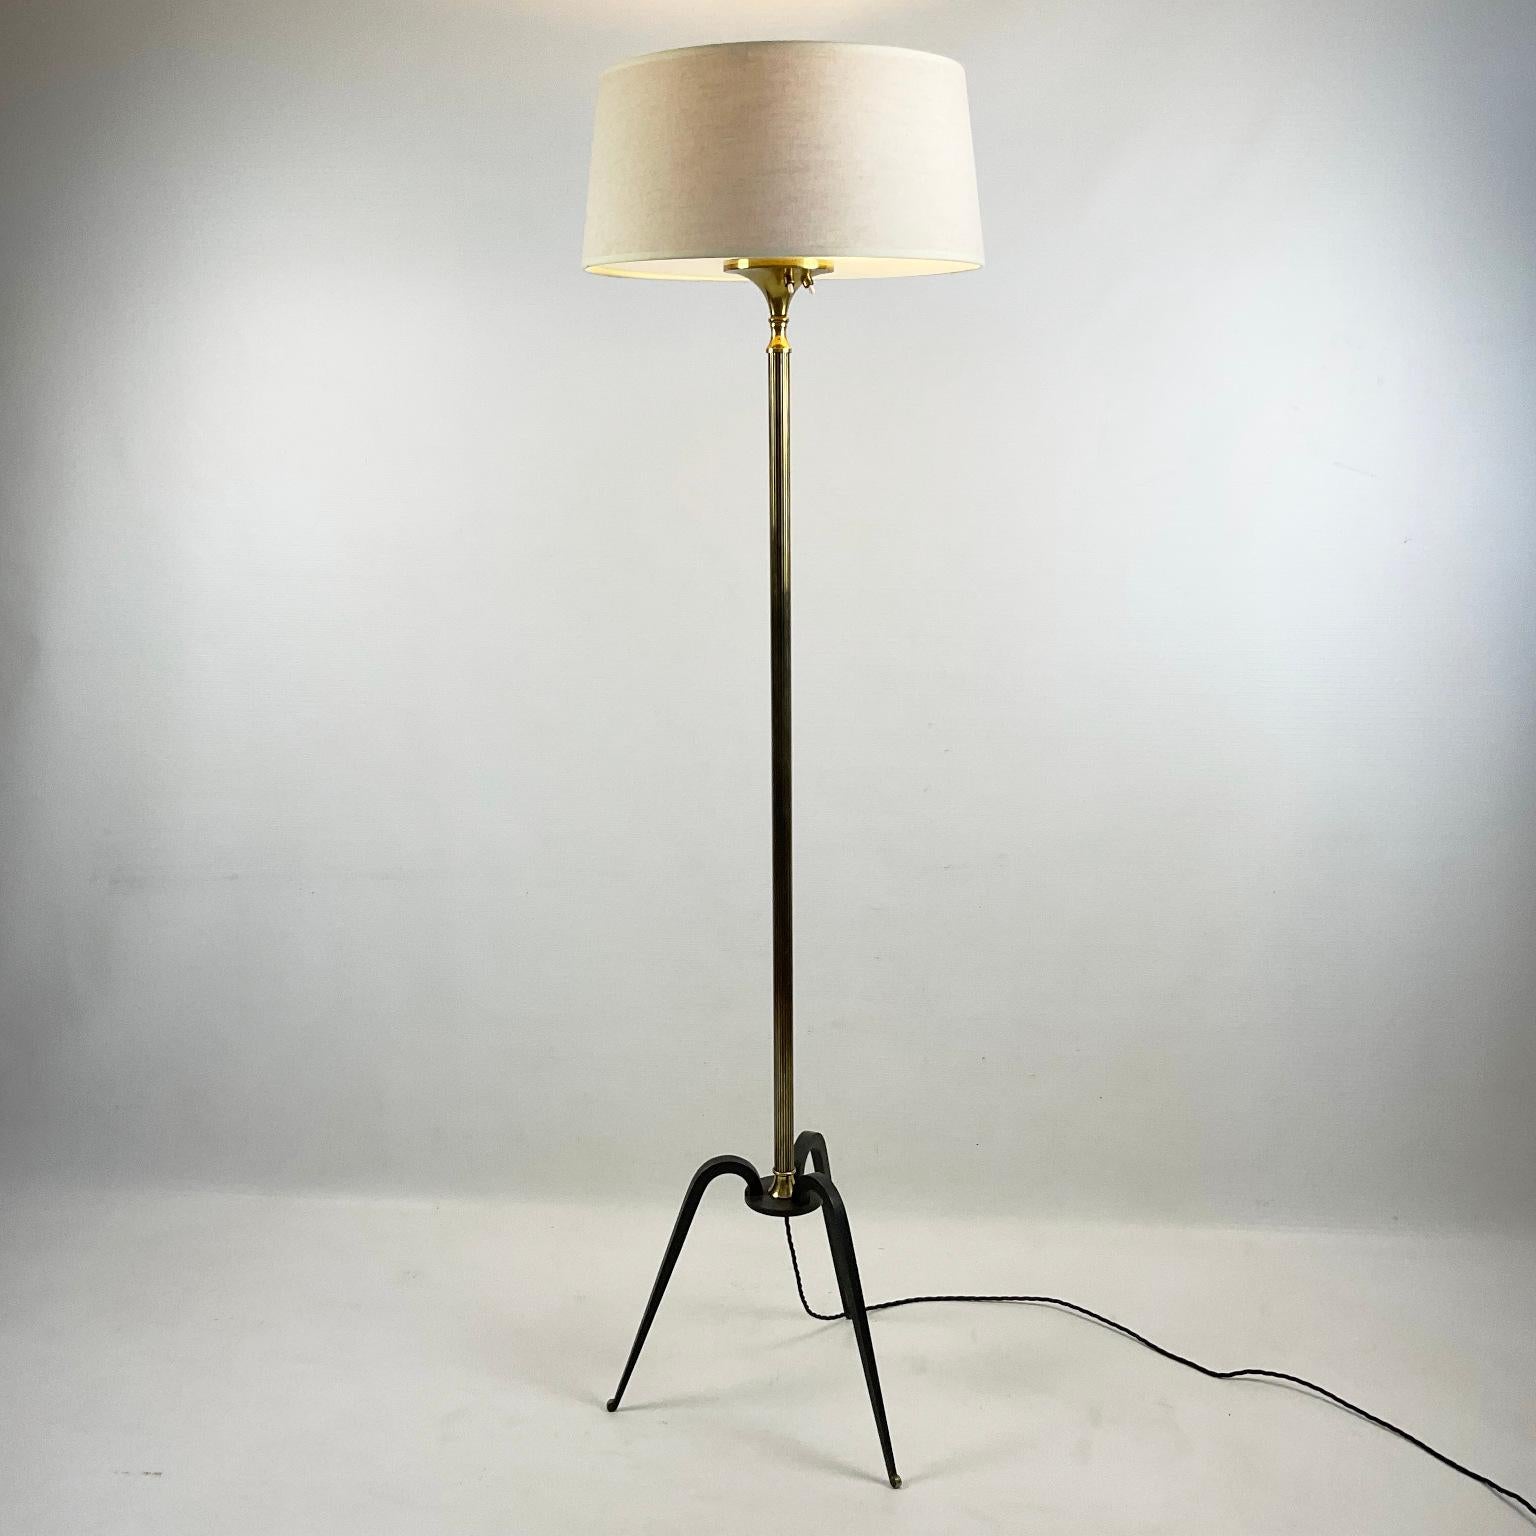 1950s Maison Arlus Floor Lamp in a Hollywood Regency Style For Sale 2